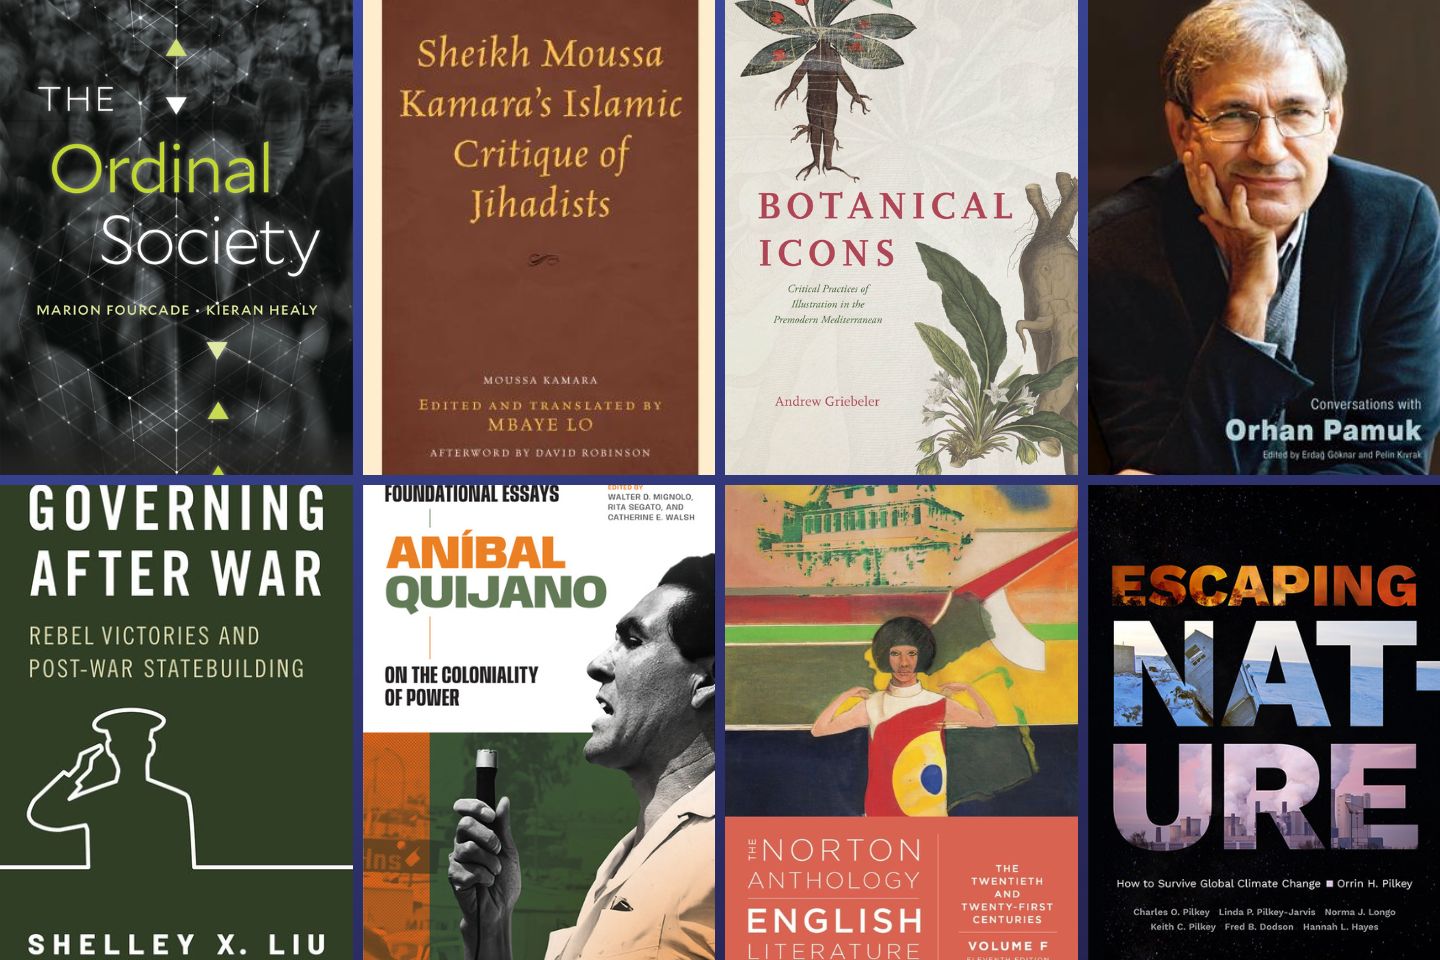 Books: Ordinal Society, Sheikh Moussa Kamara's Islamic Critique of Jihadists, Botanical Icons, Conversations with Orhan Pamuk, Governing After War, Anibal Quijano on the Coloniality of Power, Norton Anthology of English Literature, Escaping nature.